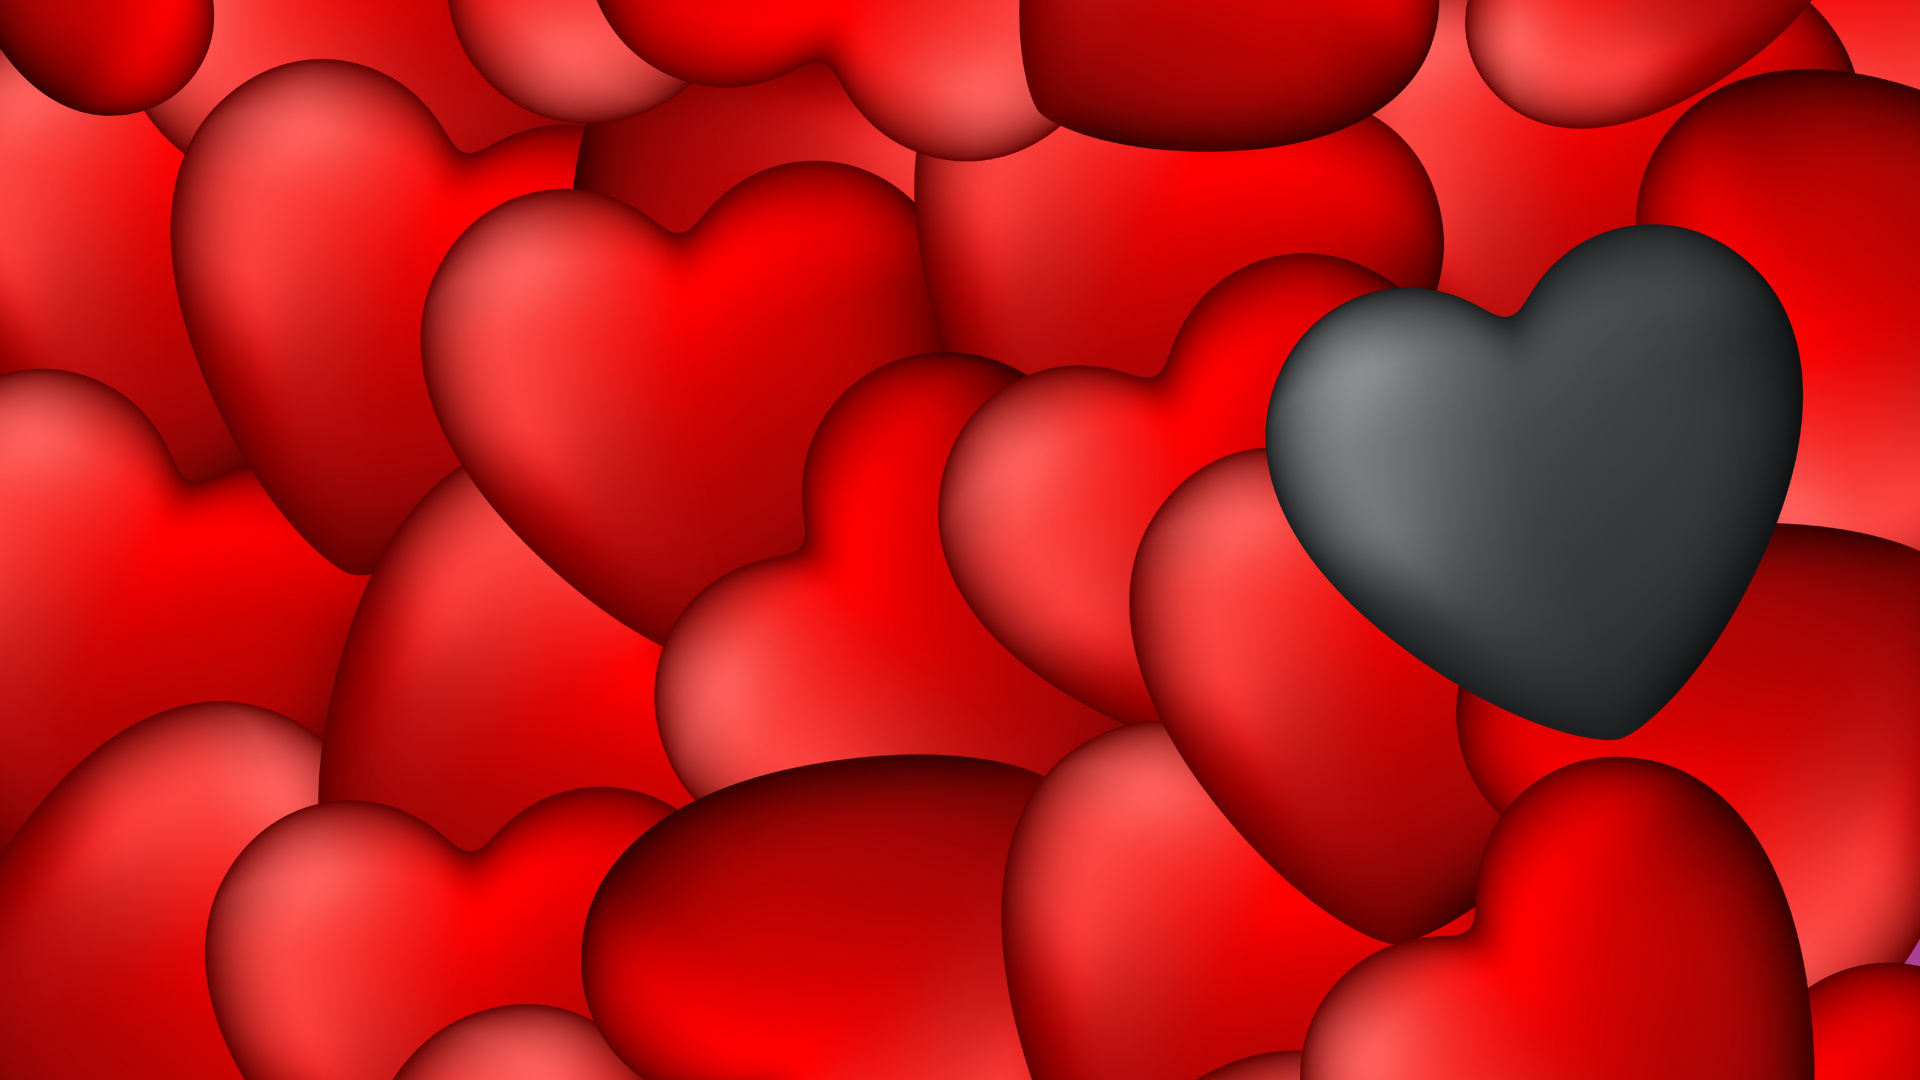 Heart, Black, Red, Valentines Day, Petal. Wallpaper in 1920x1080 Resolution